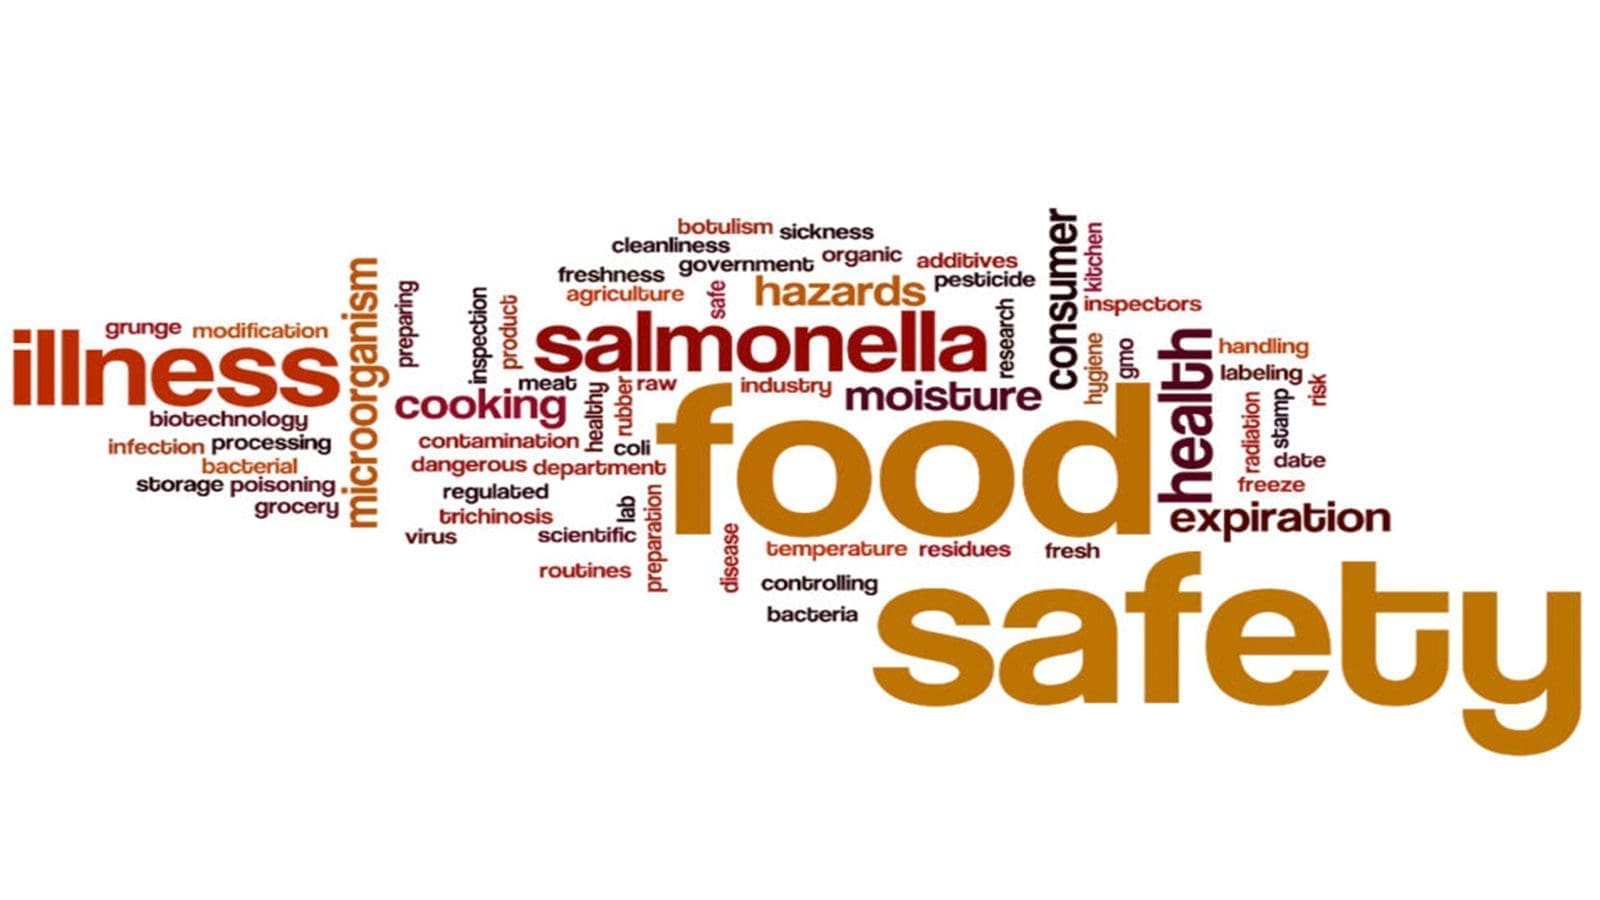 GFSI publishes report on recent trends that could impact its food safety initiatives